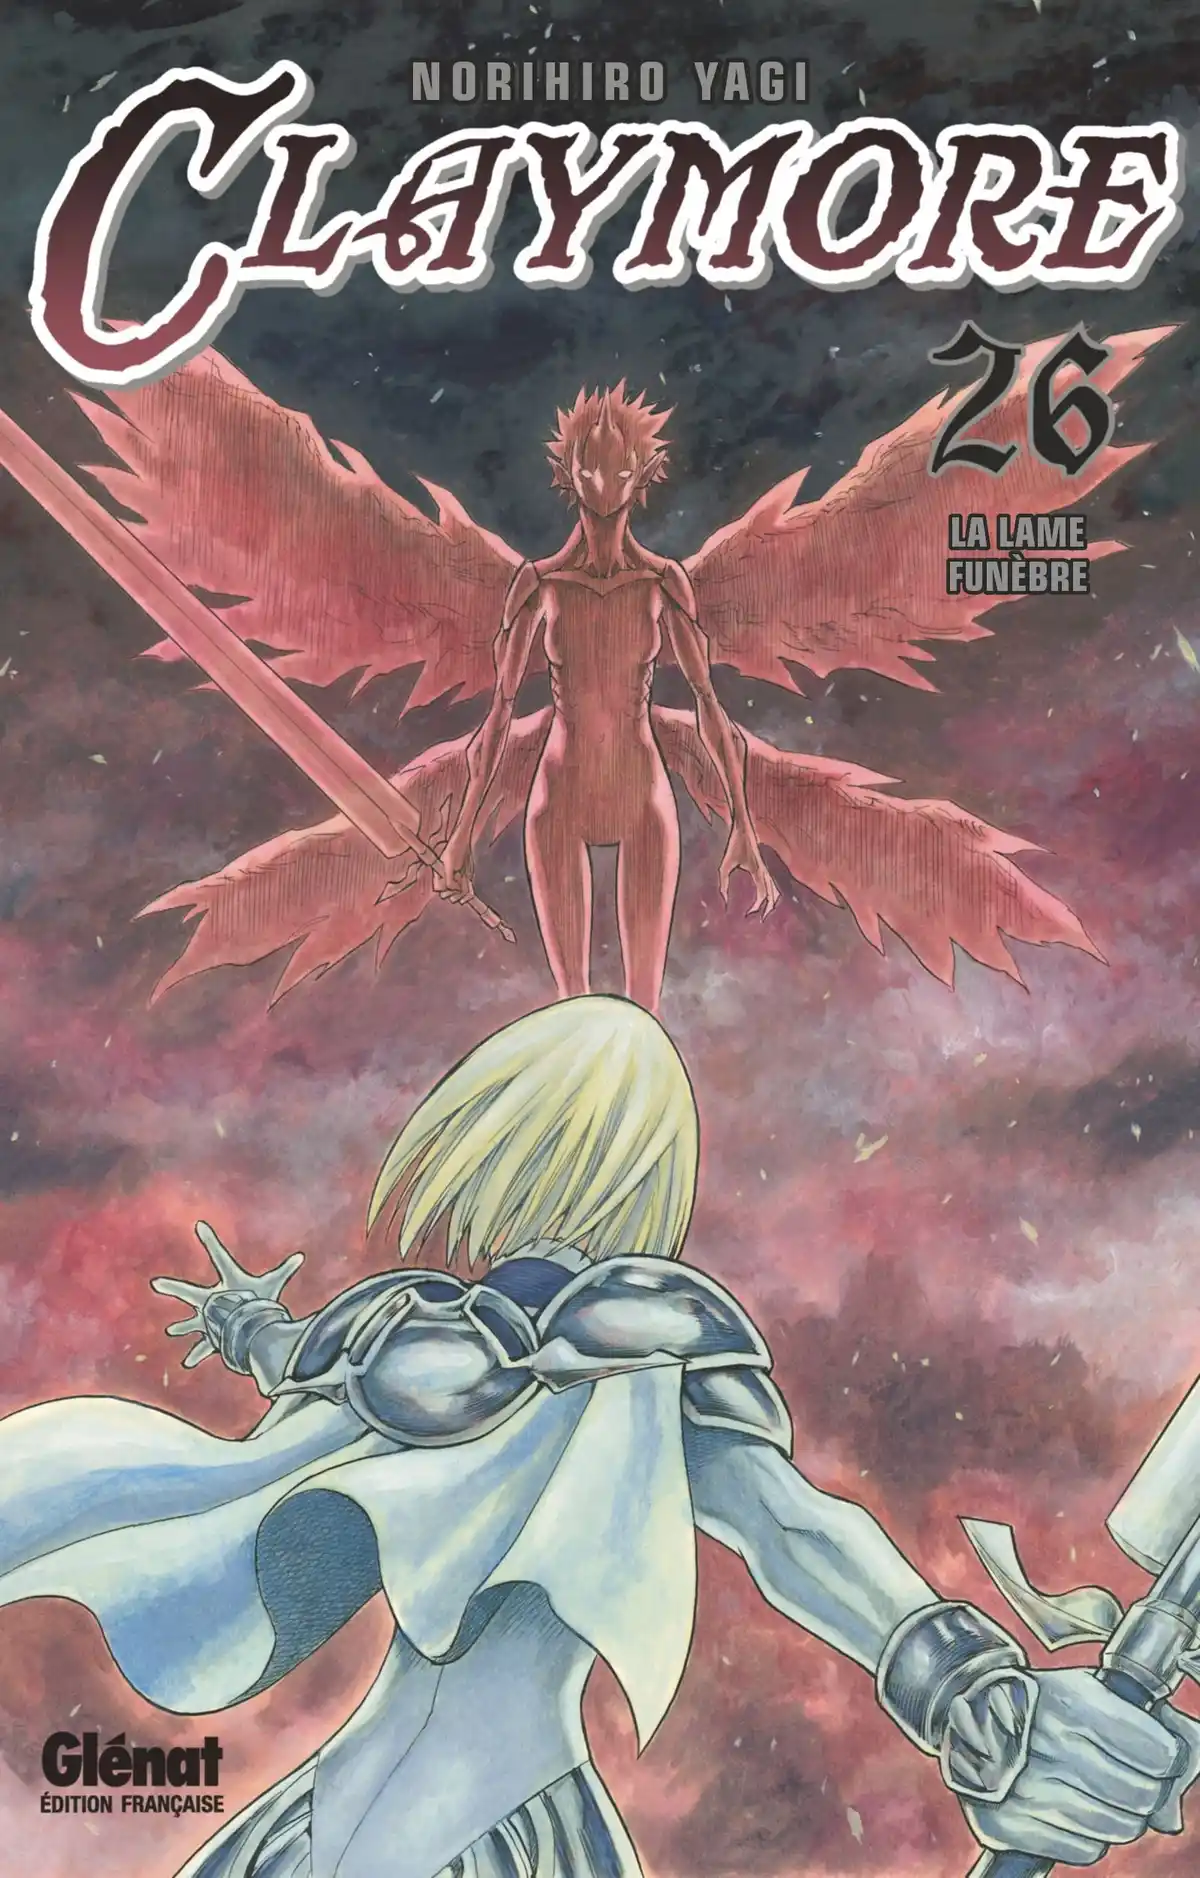 Claymore Volume 26 page 1